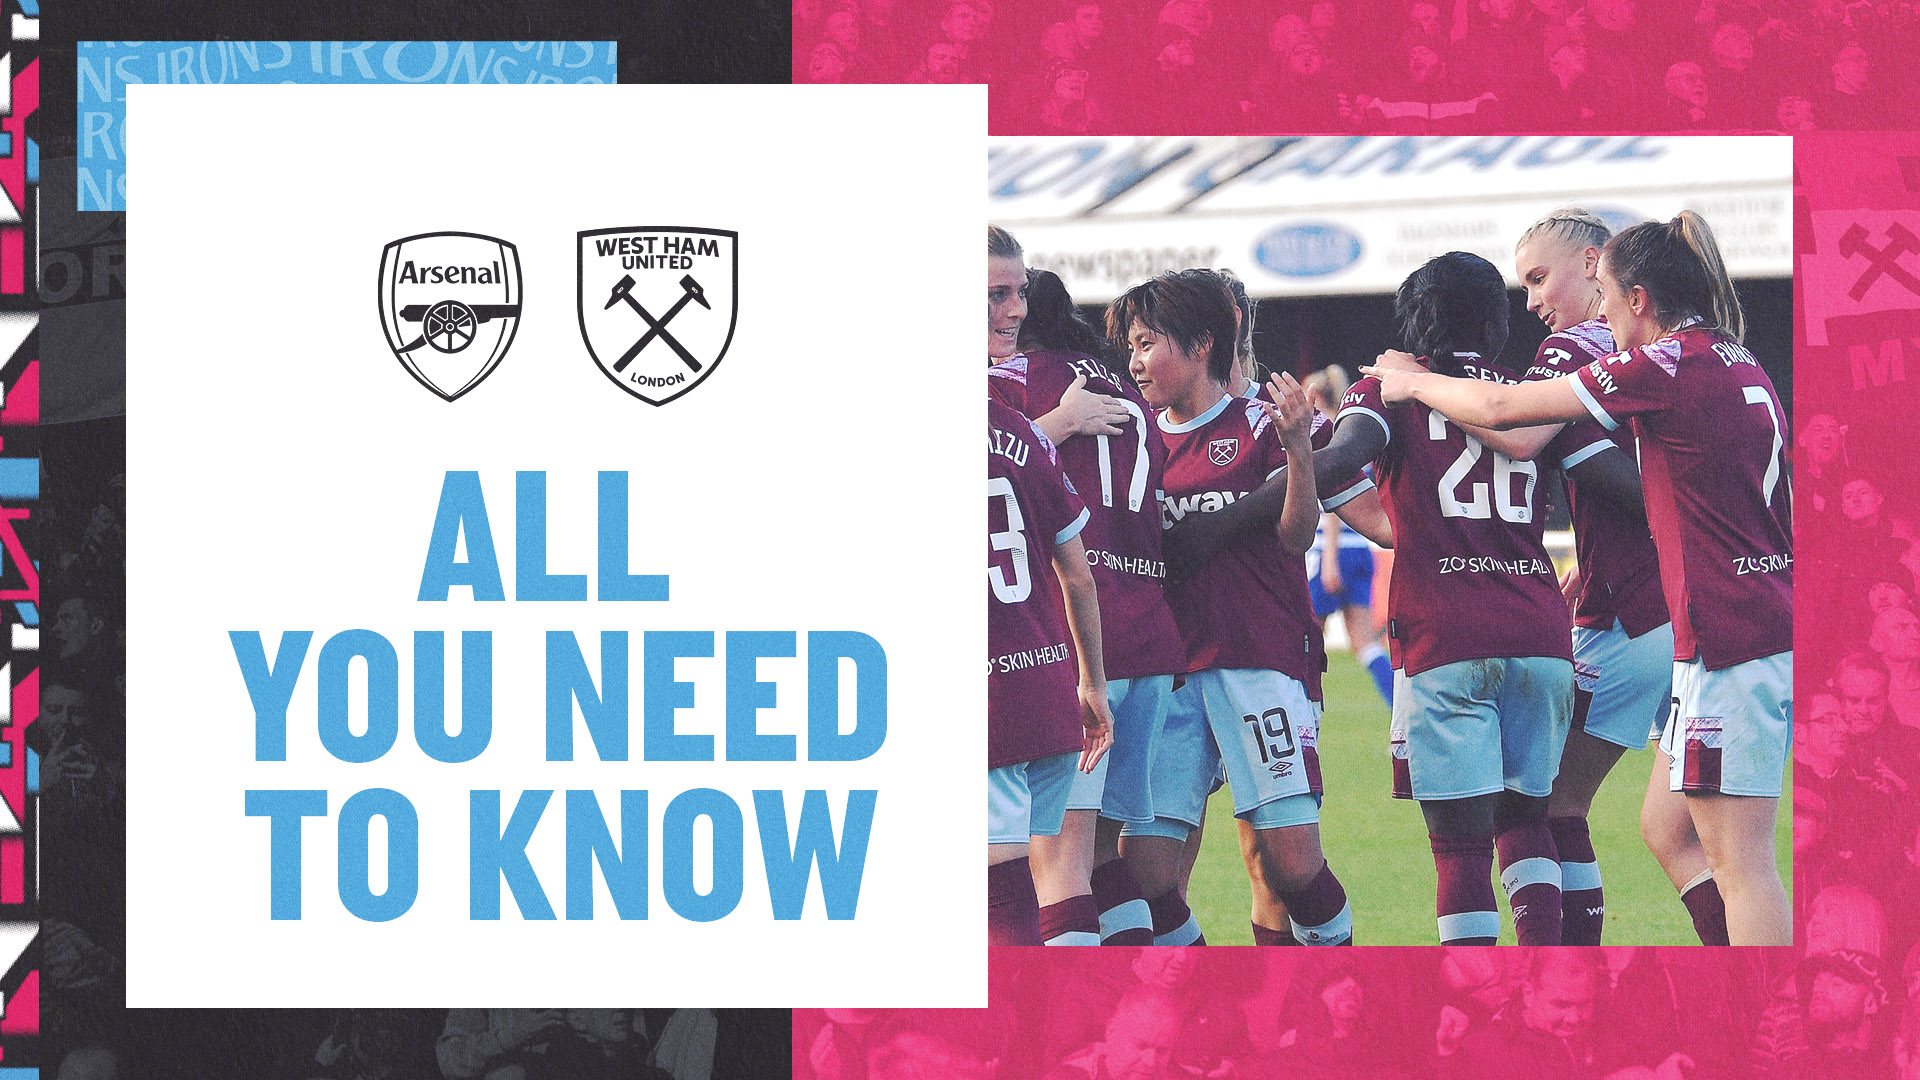 Arsenal (A) - All You Need To Know